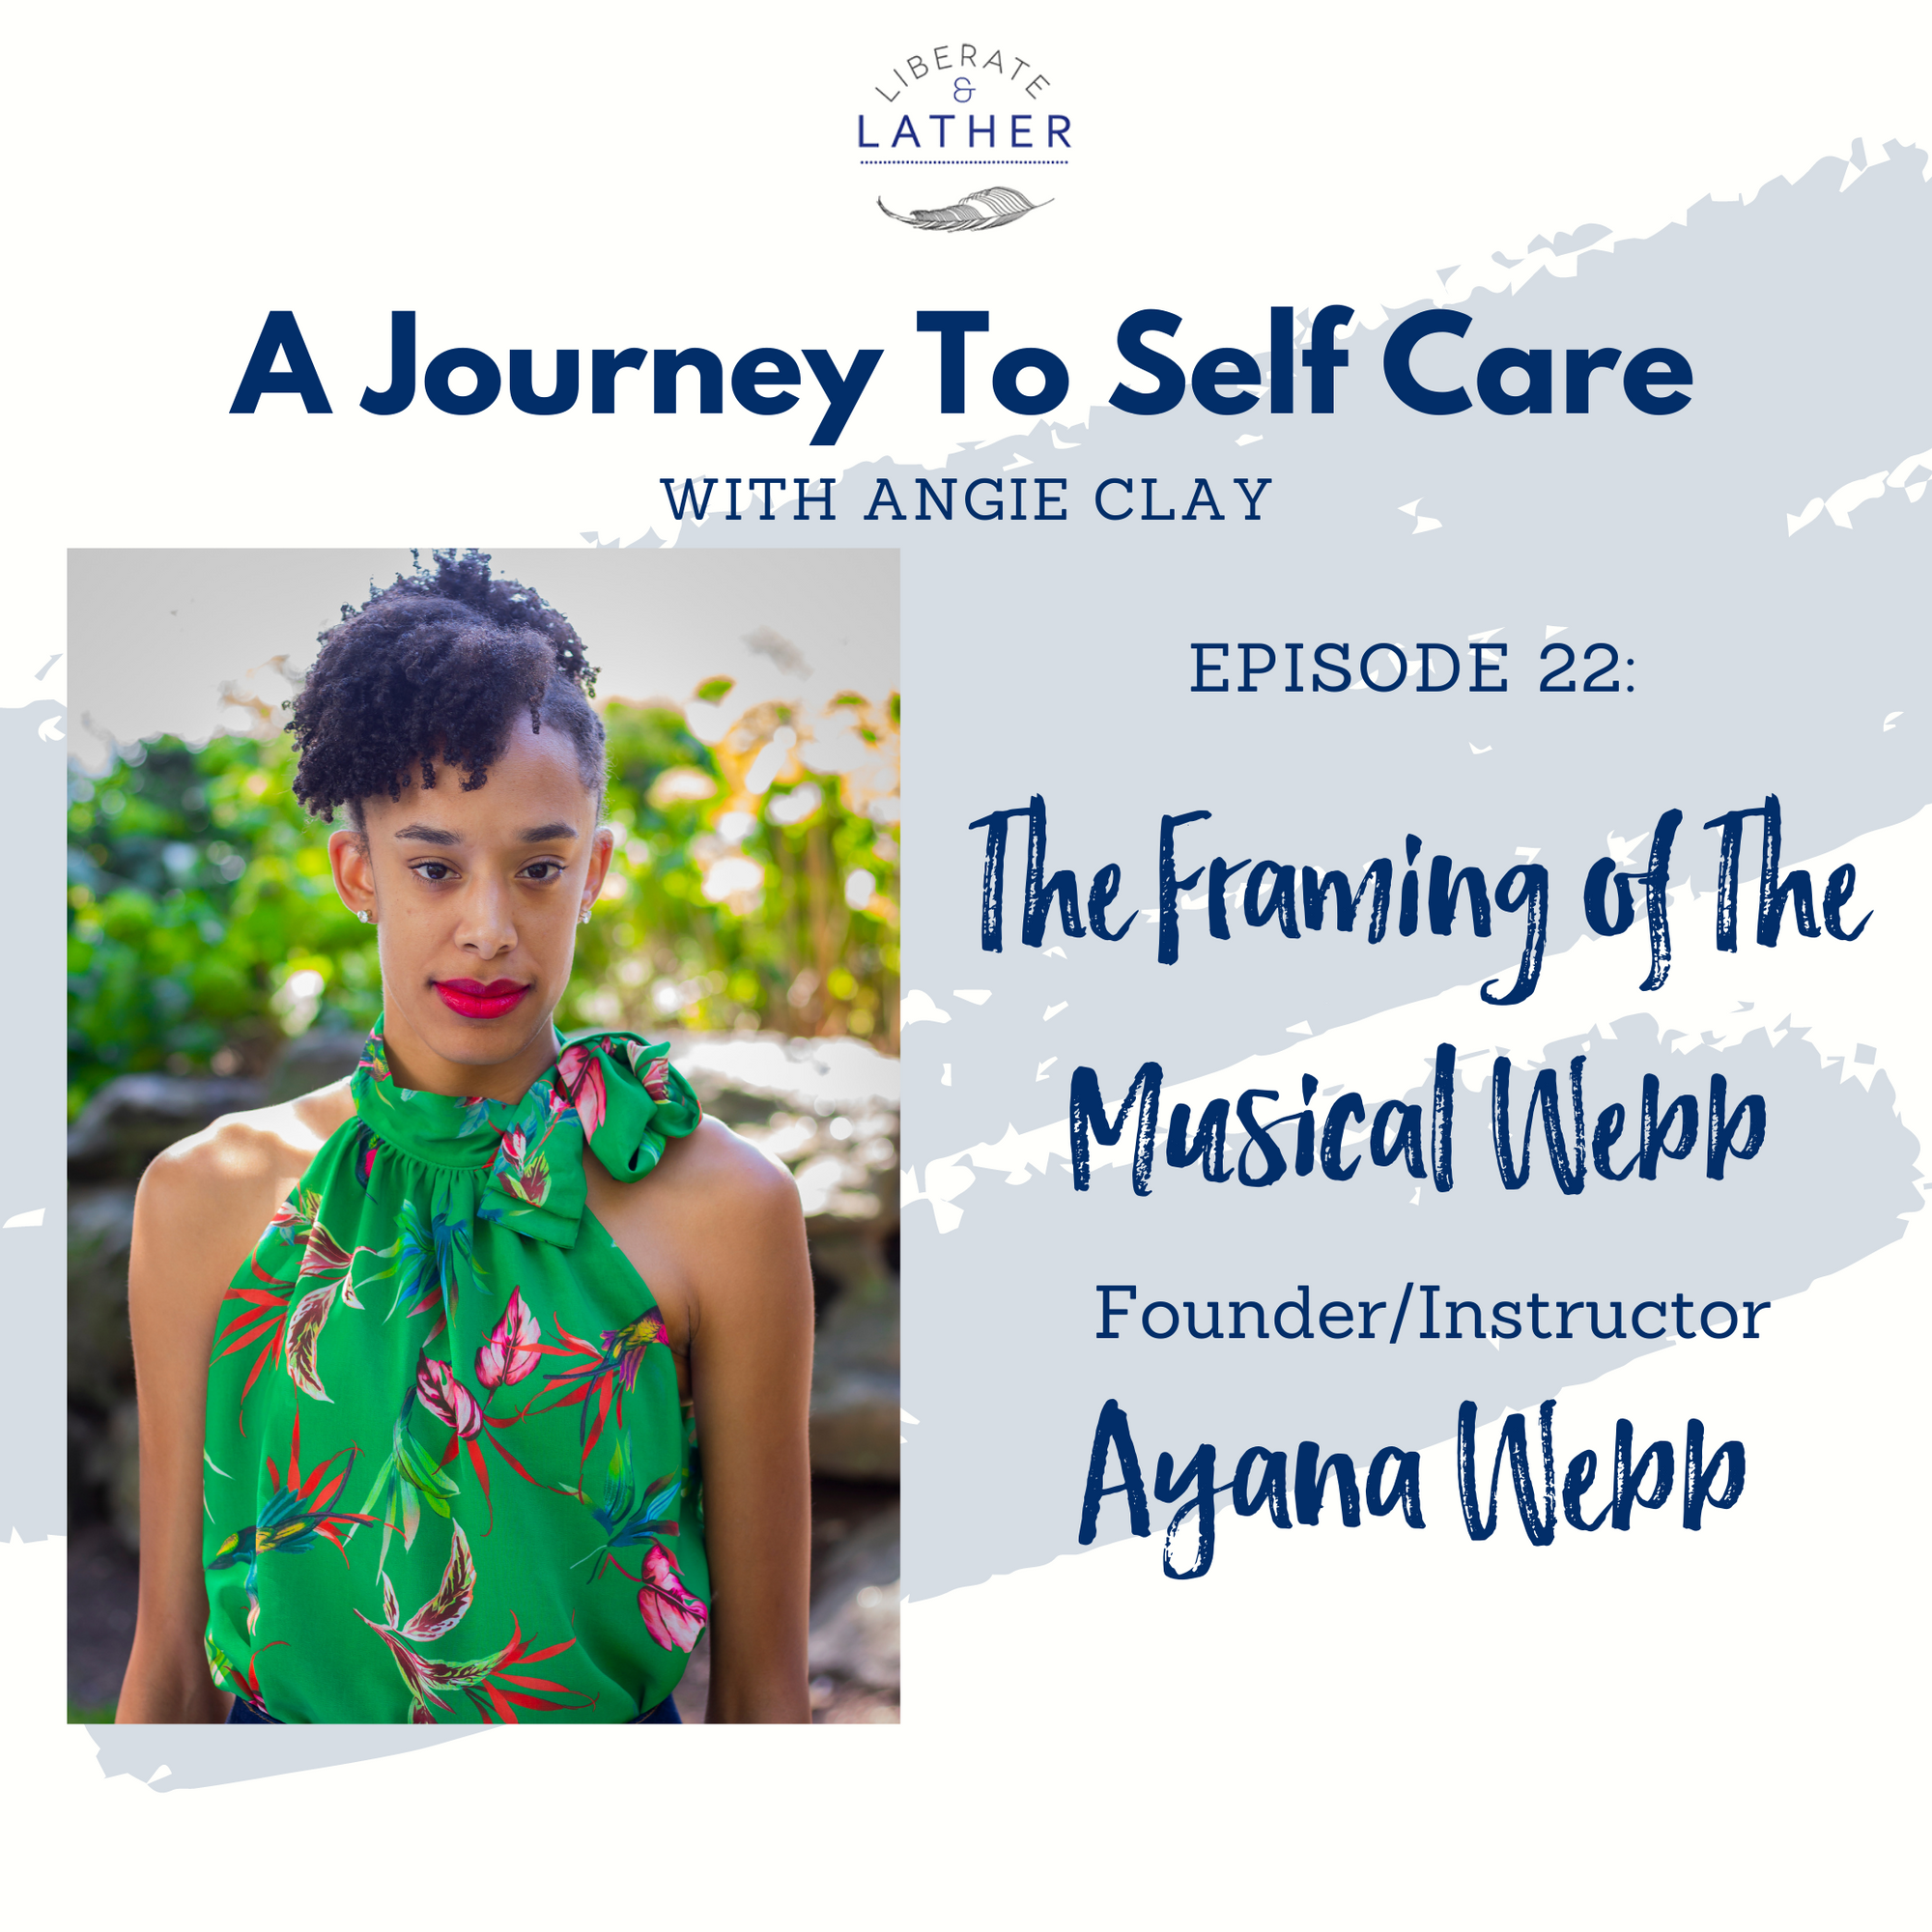 Founder Ayana Webb Discusses the Framing of The Musical Webb